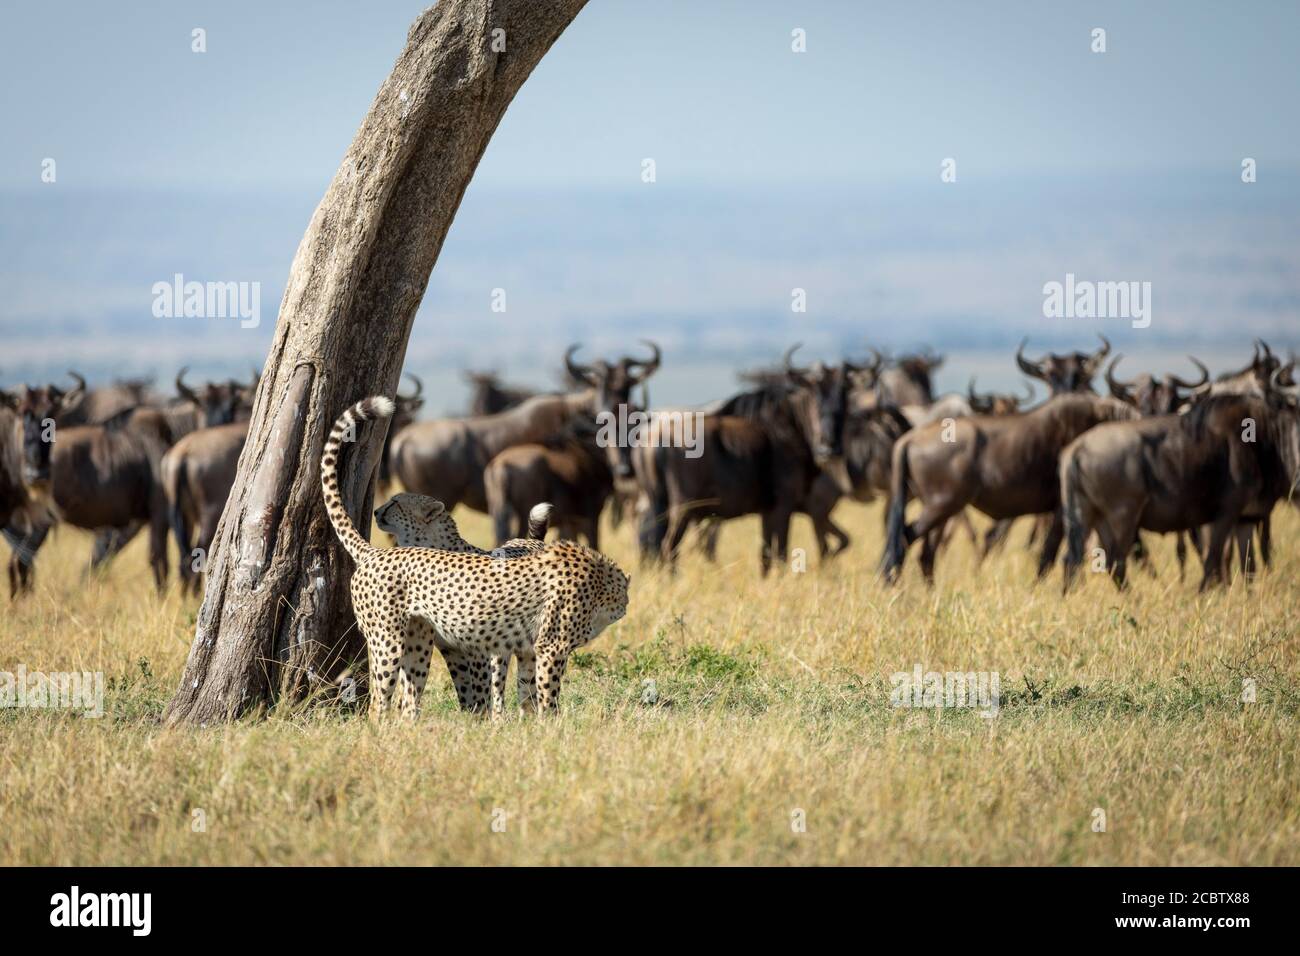 Two adult cheetah standing by a tree smelling and marking territory with a herd of wildebeest in background in Masai Mara Kenya Stock Photo